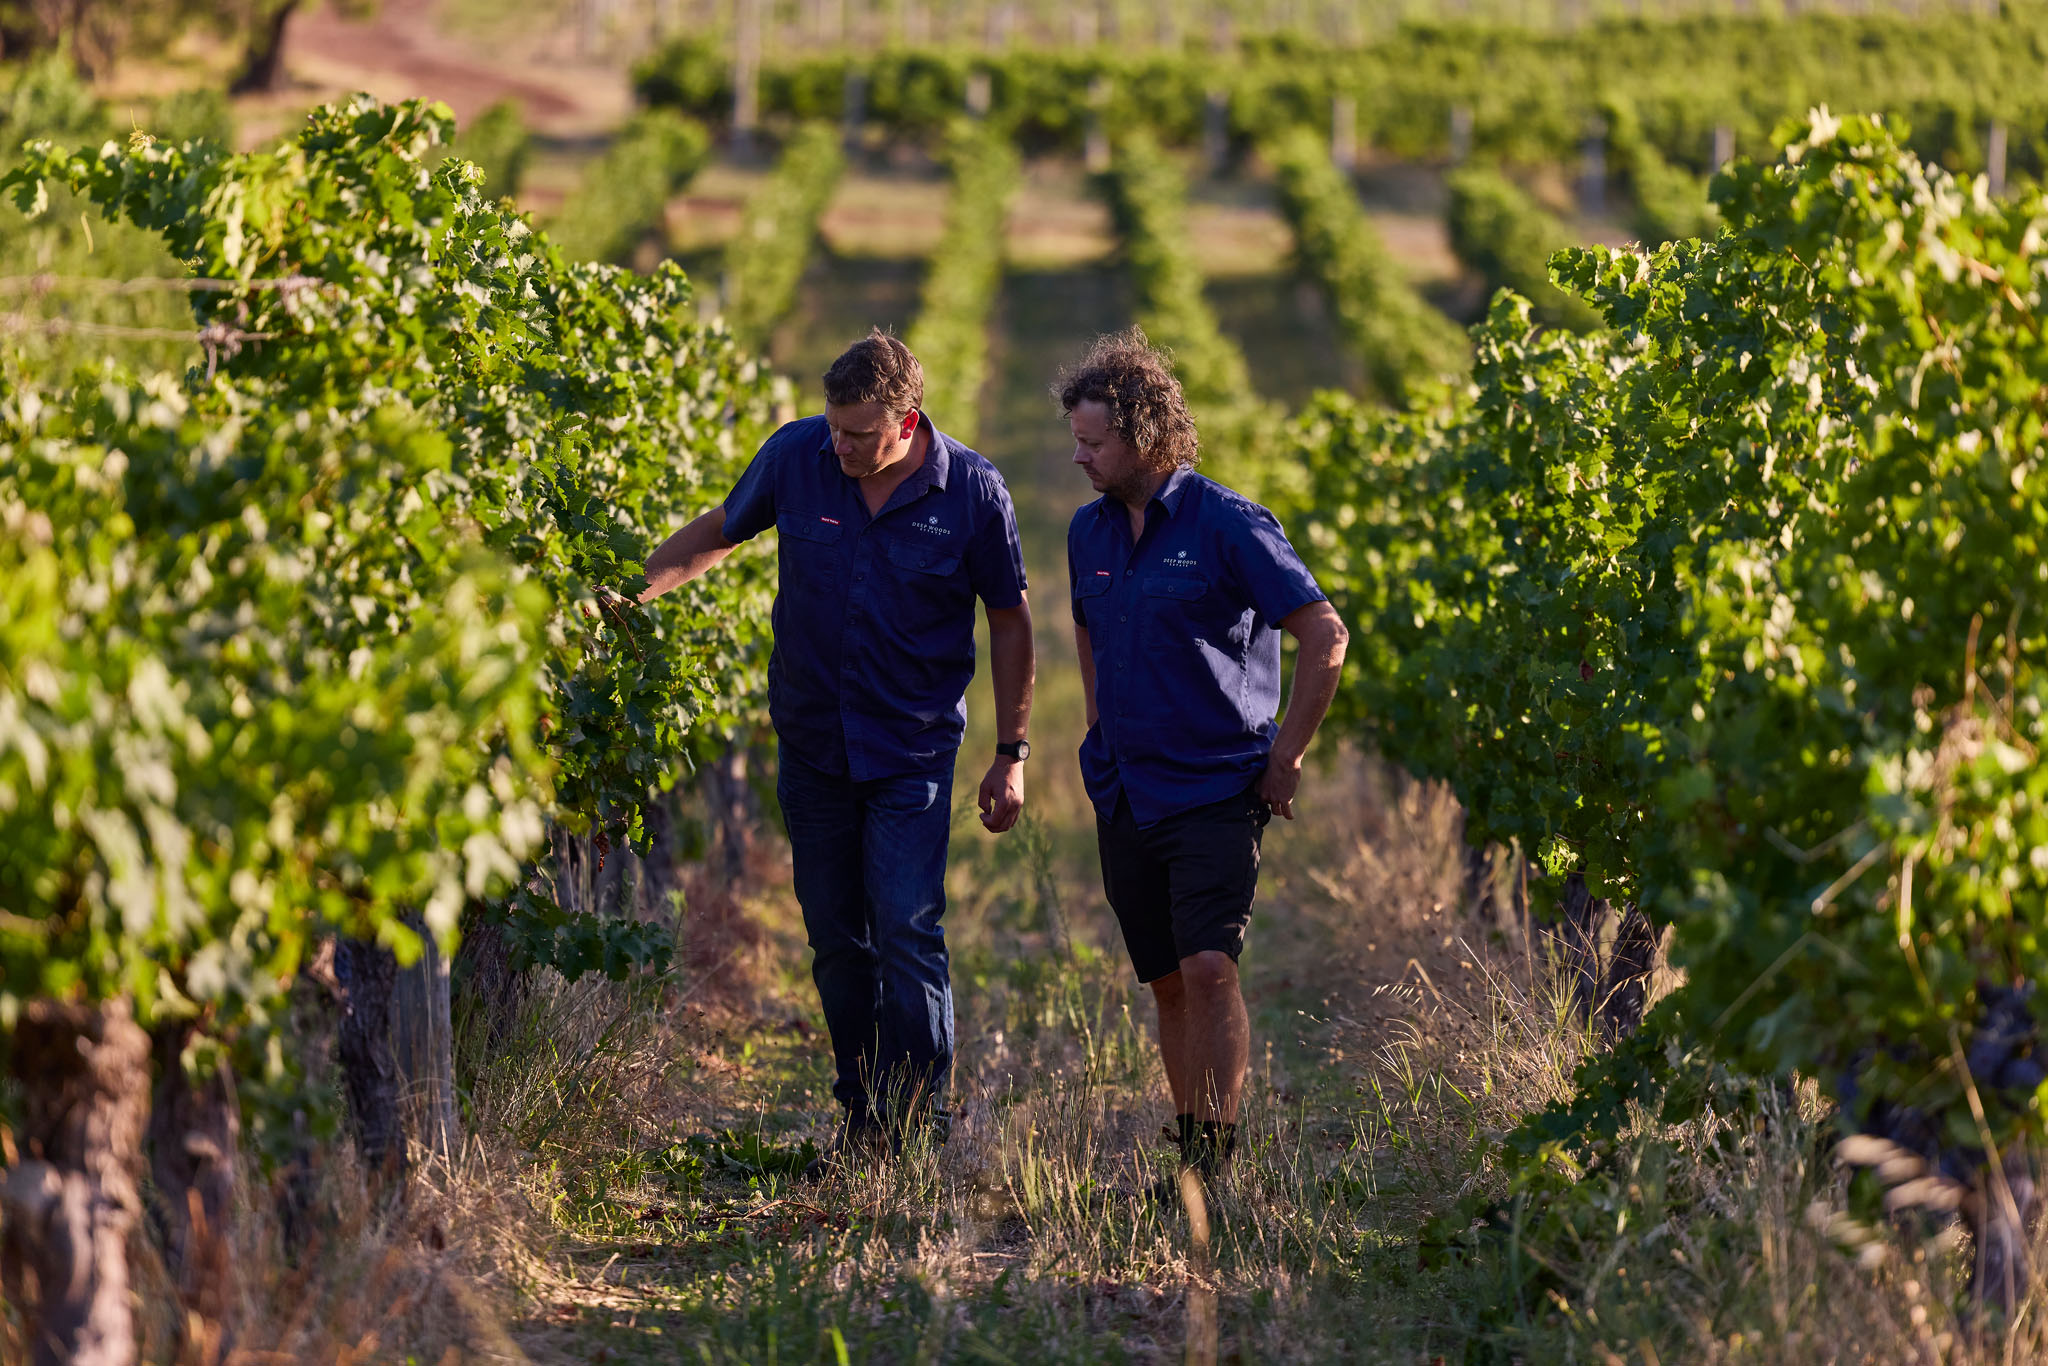 Two men inspecting the grapes at the vineyard 